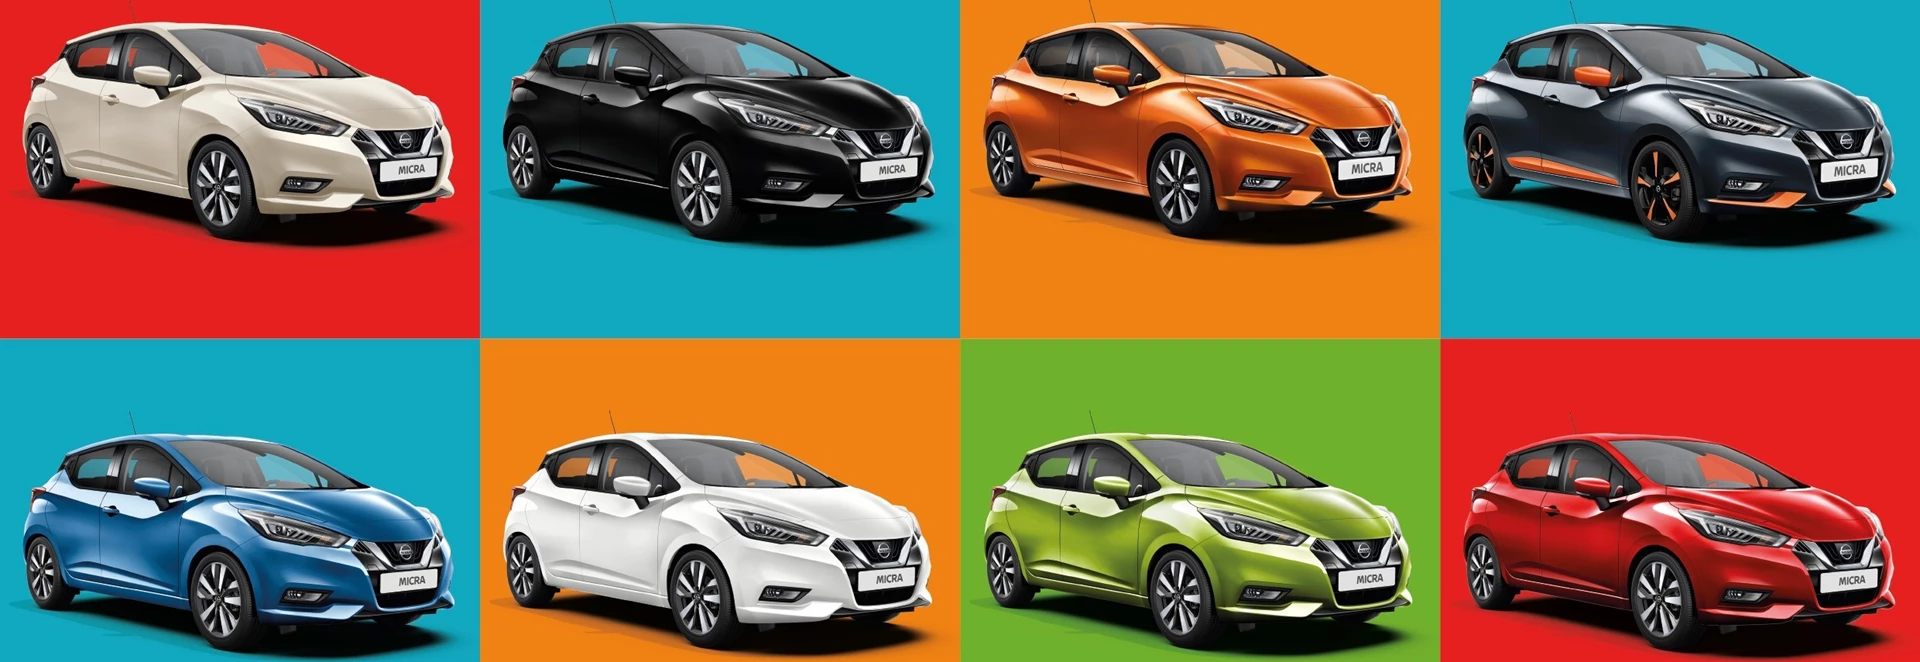 More than 80 per cent drive the wrong colour car for their personality 